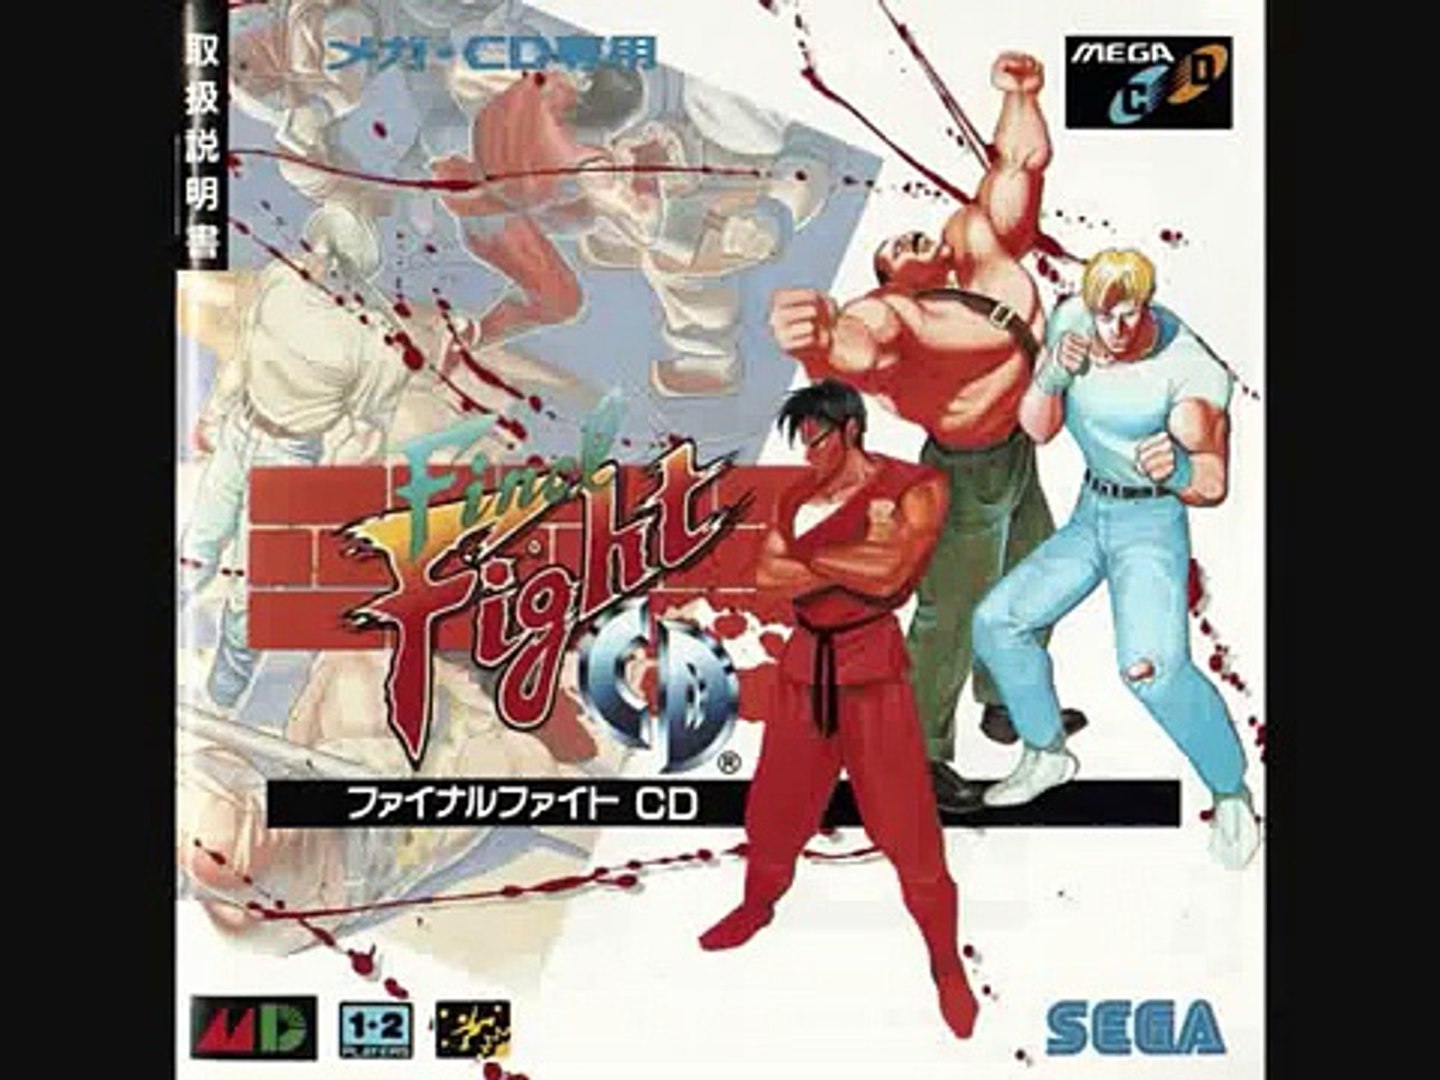 Final Fight Cd Ost Bay Area Walk In The Park ว ด โอ Dailymotion